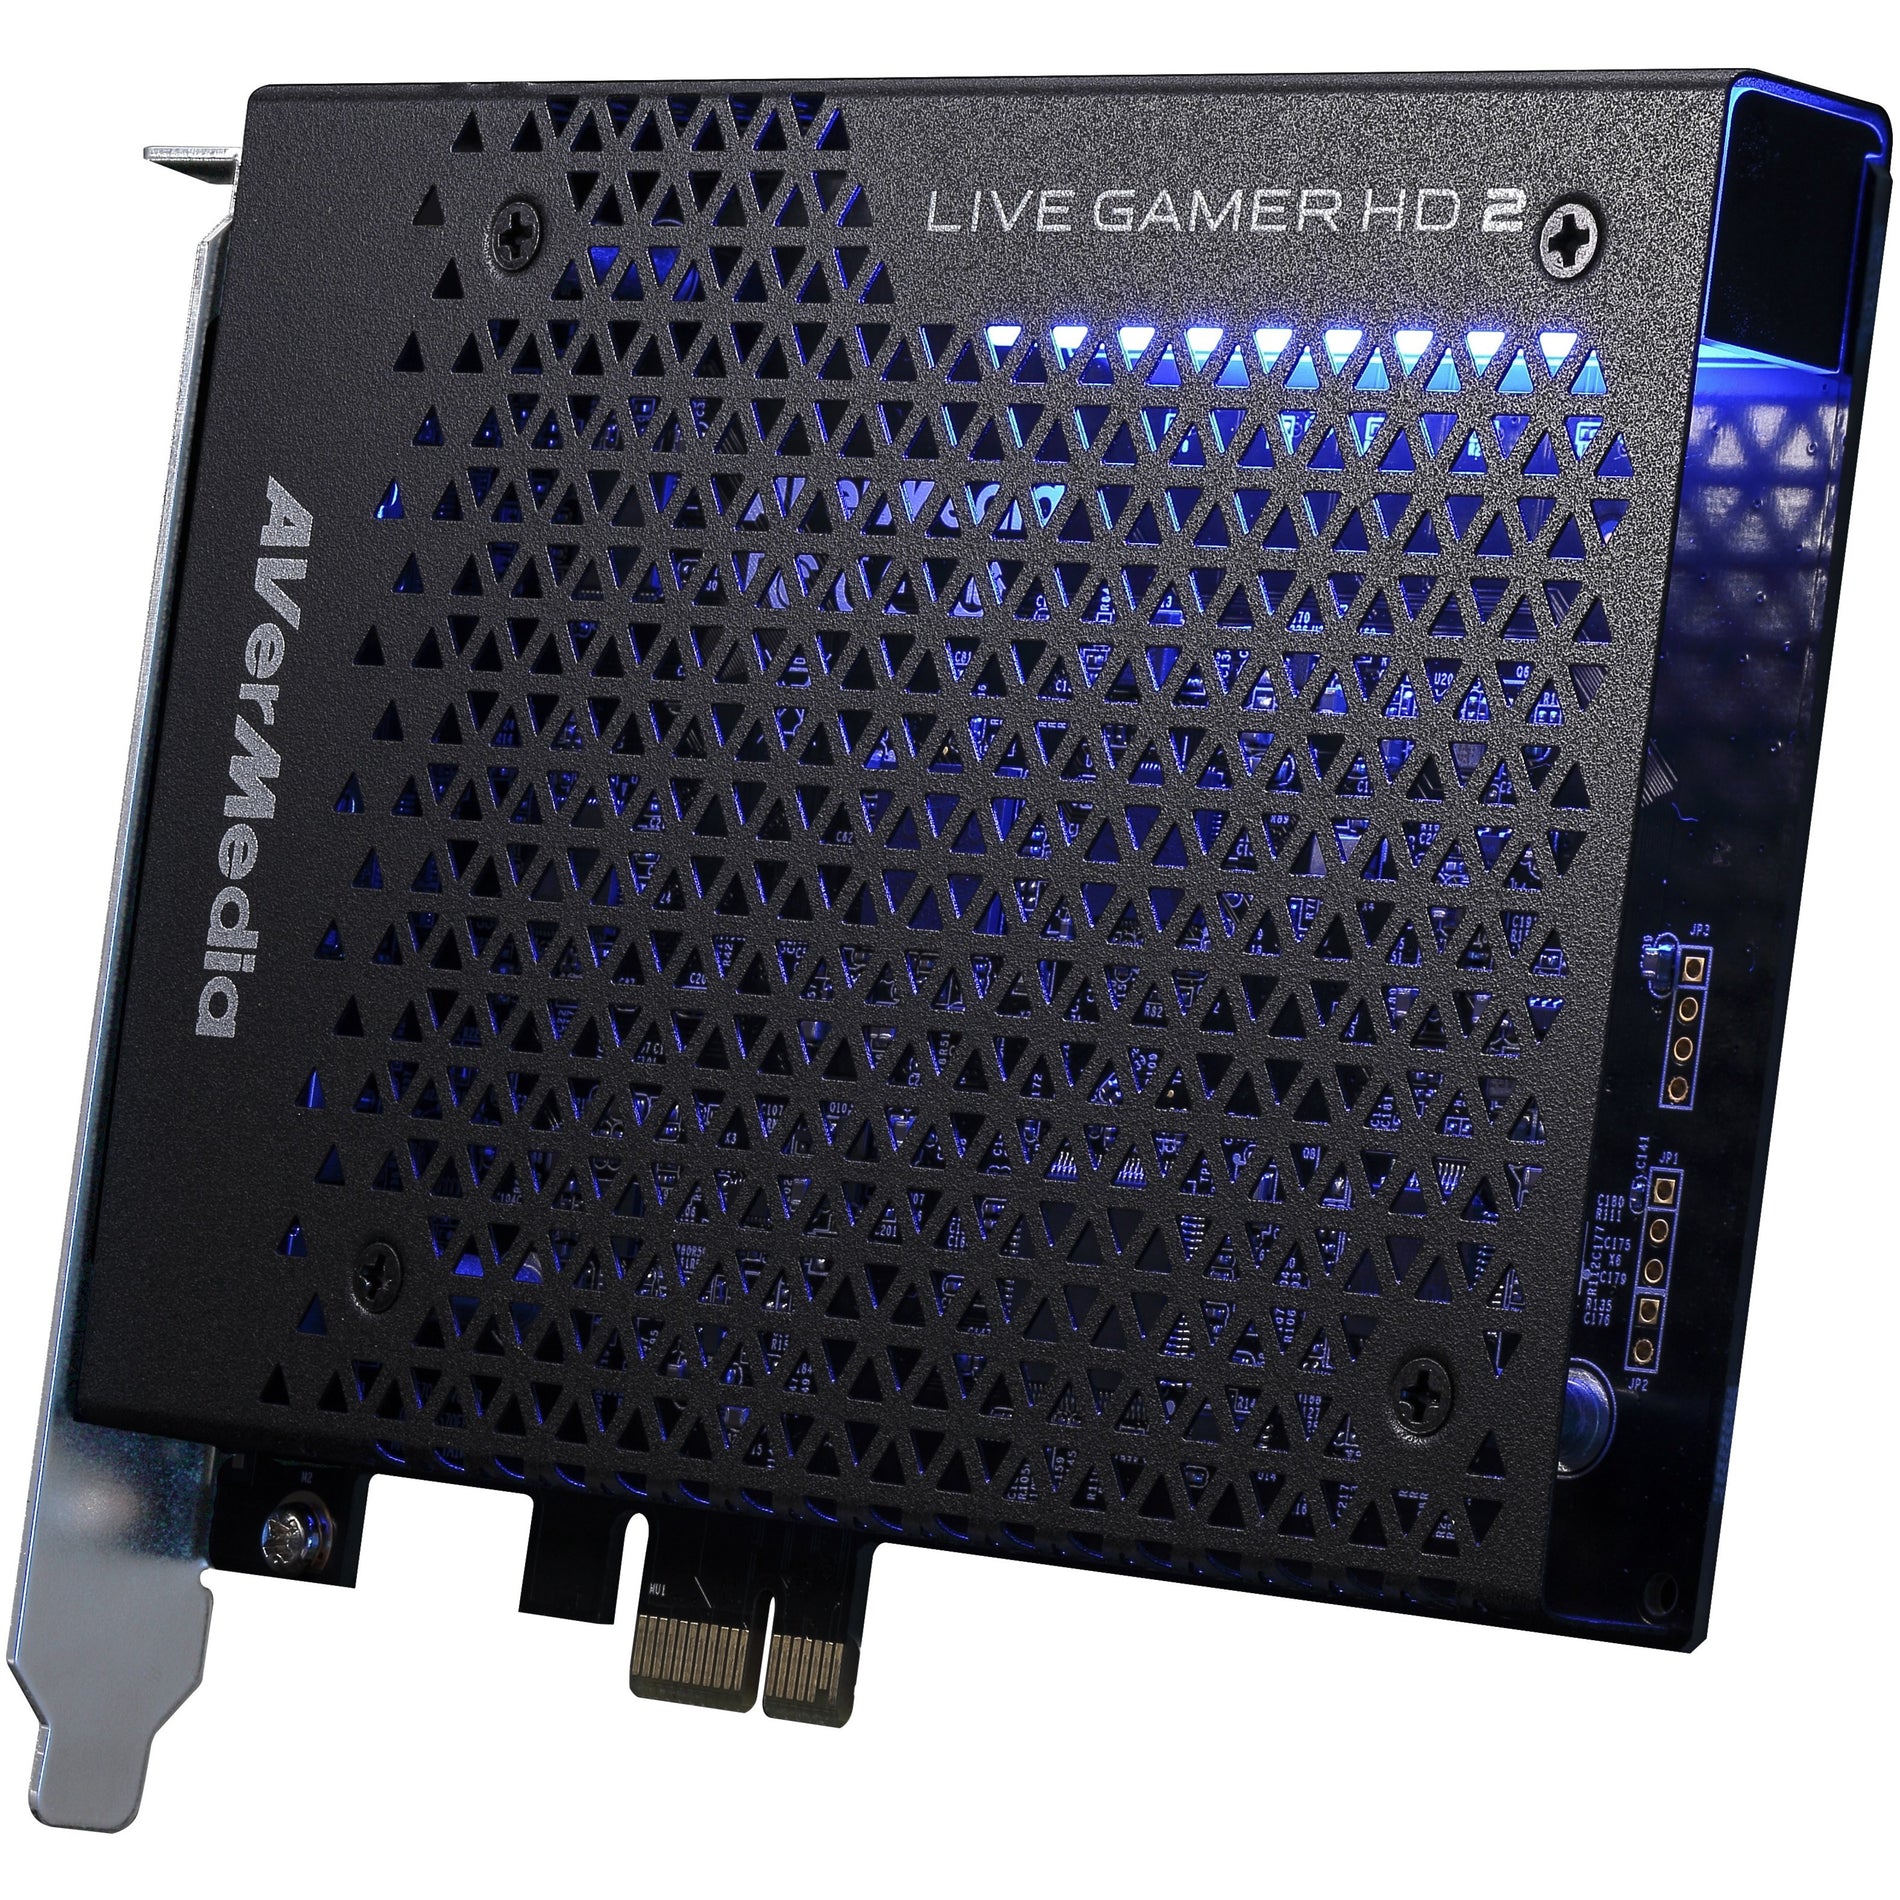 AVerMedia GC570 Live Gamer HD 2 Game Capturing Device, Video Game Recording, Video Streaming